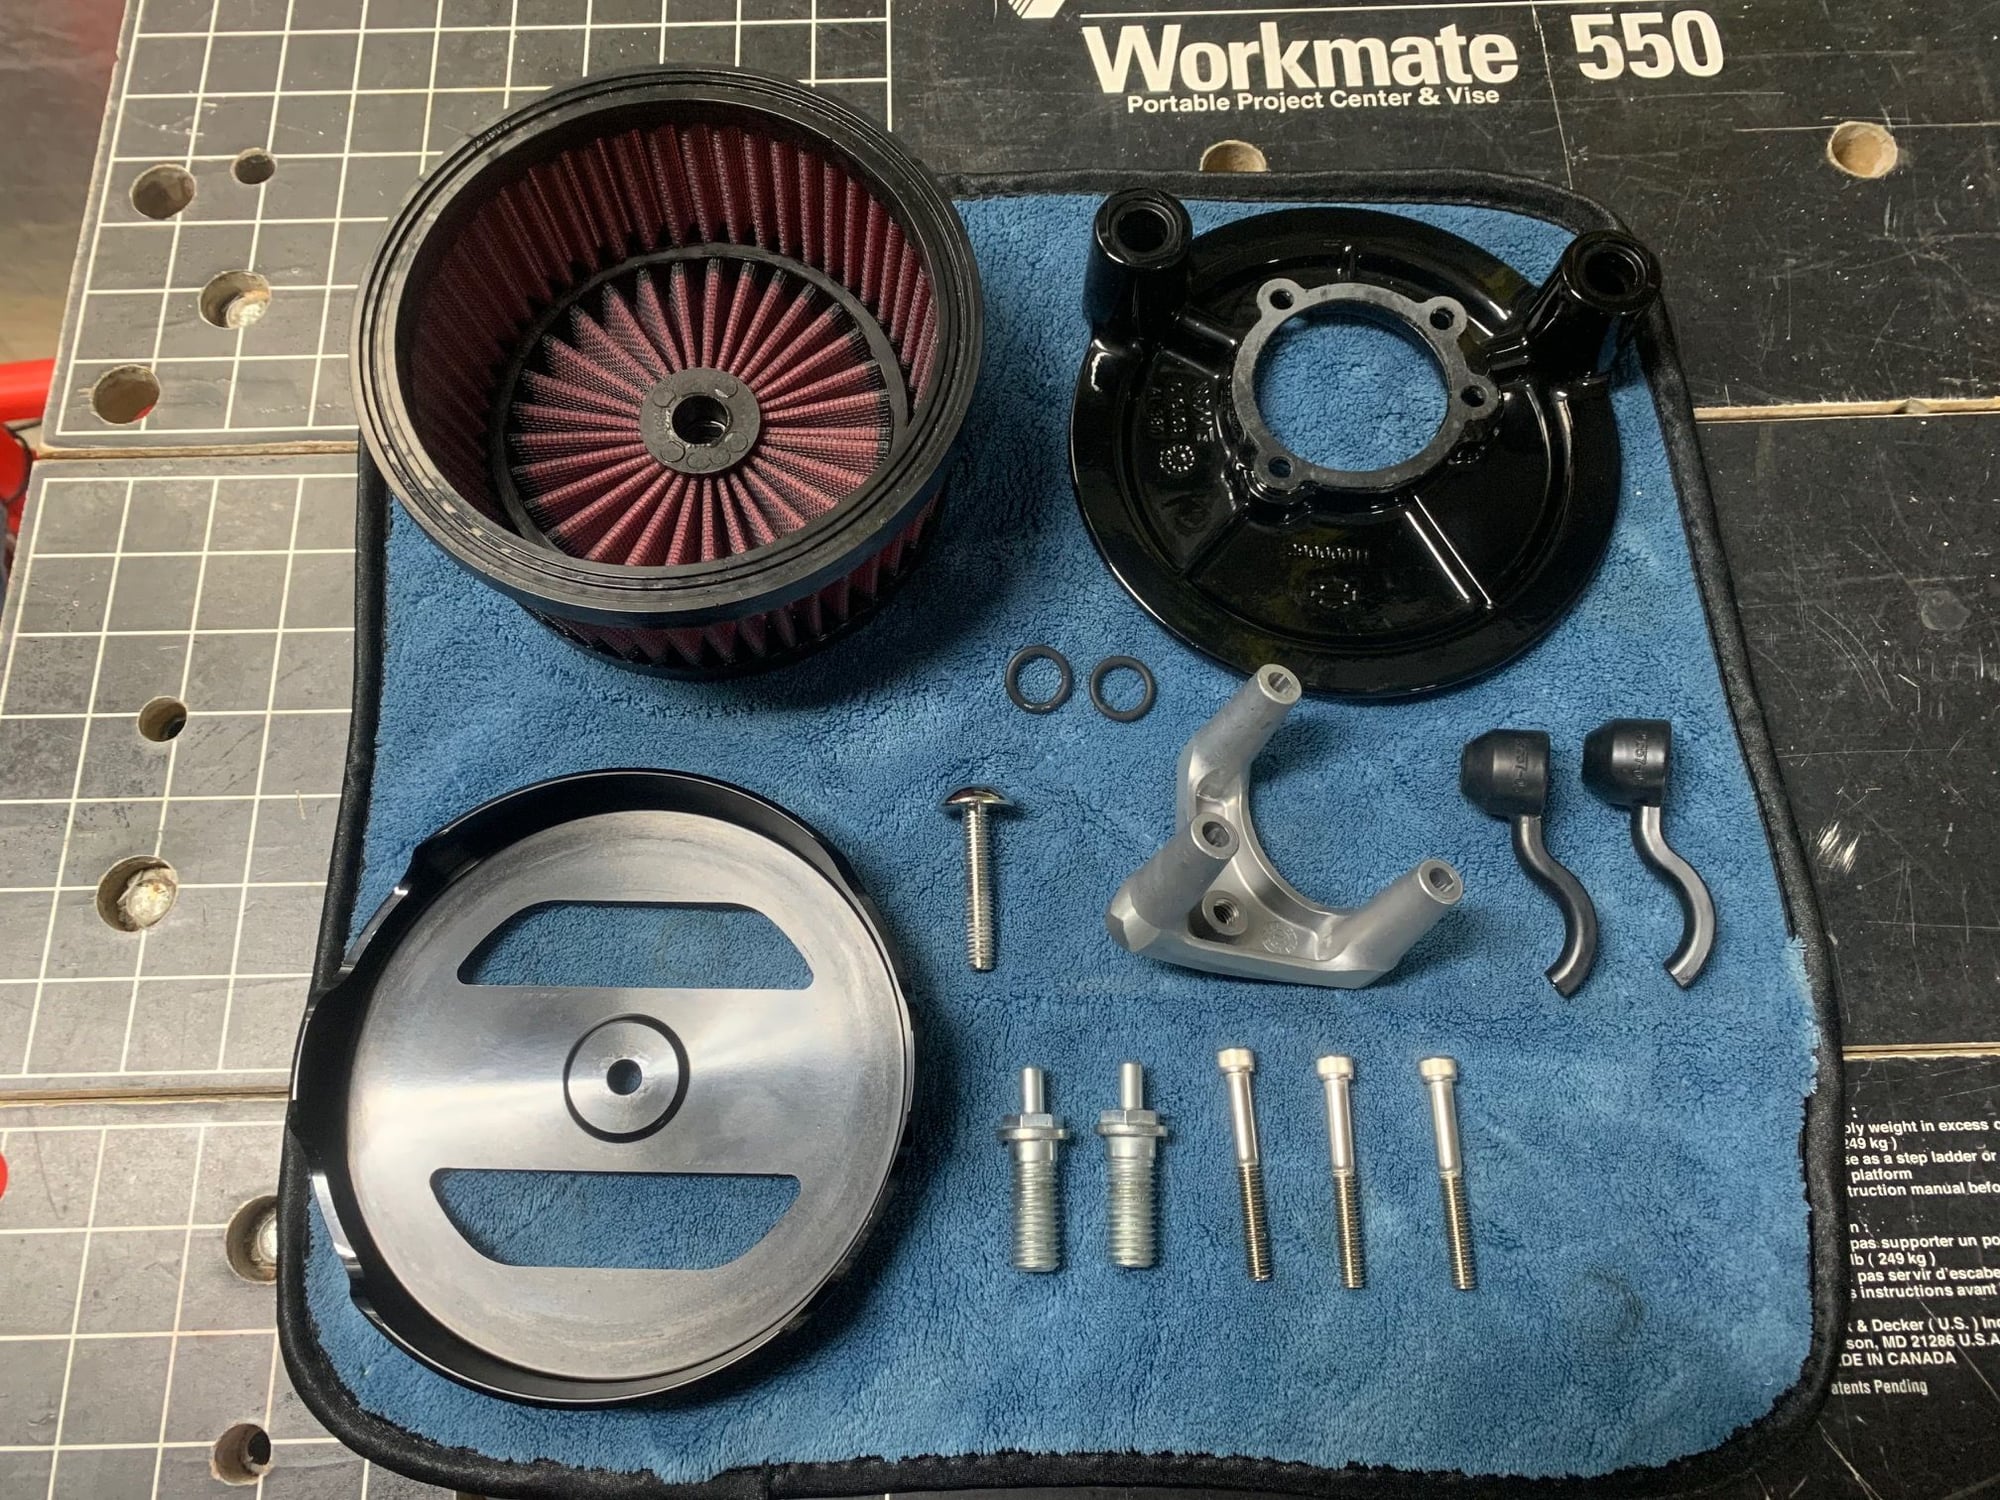 SCREAMIN' EAGLE PERFORMANCE<br />AIR CLEANER KIT - RAIL COLLECTION